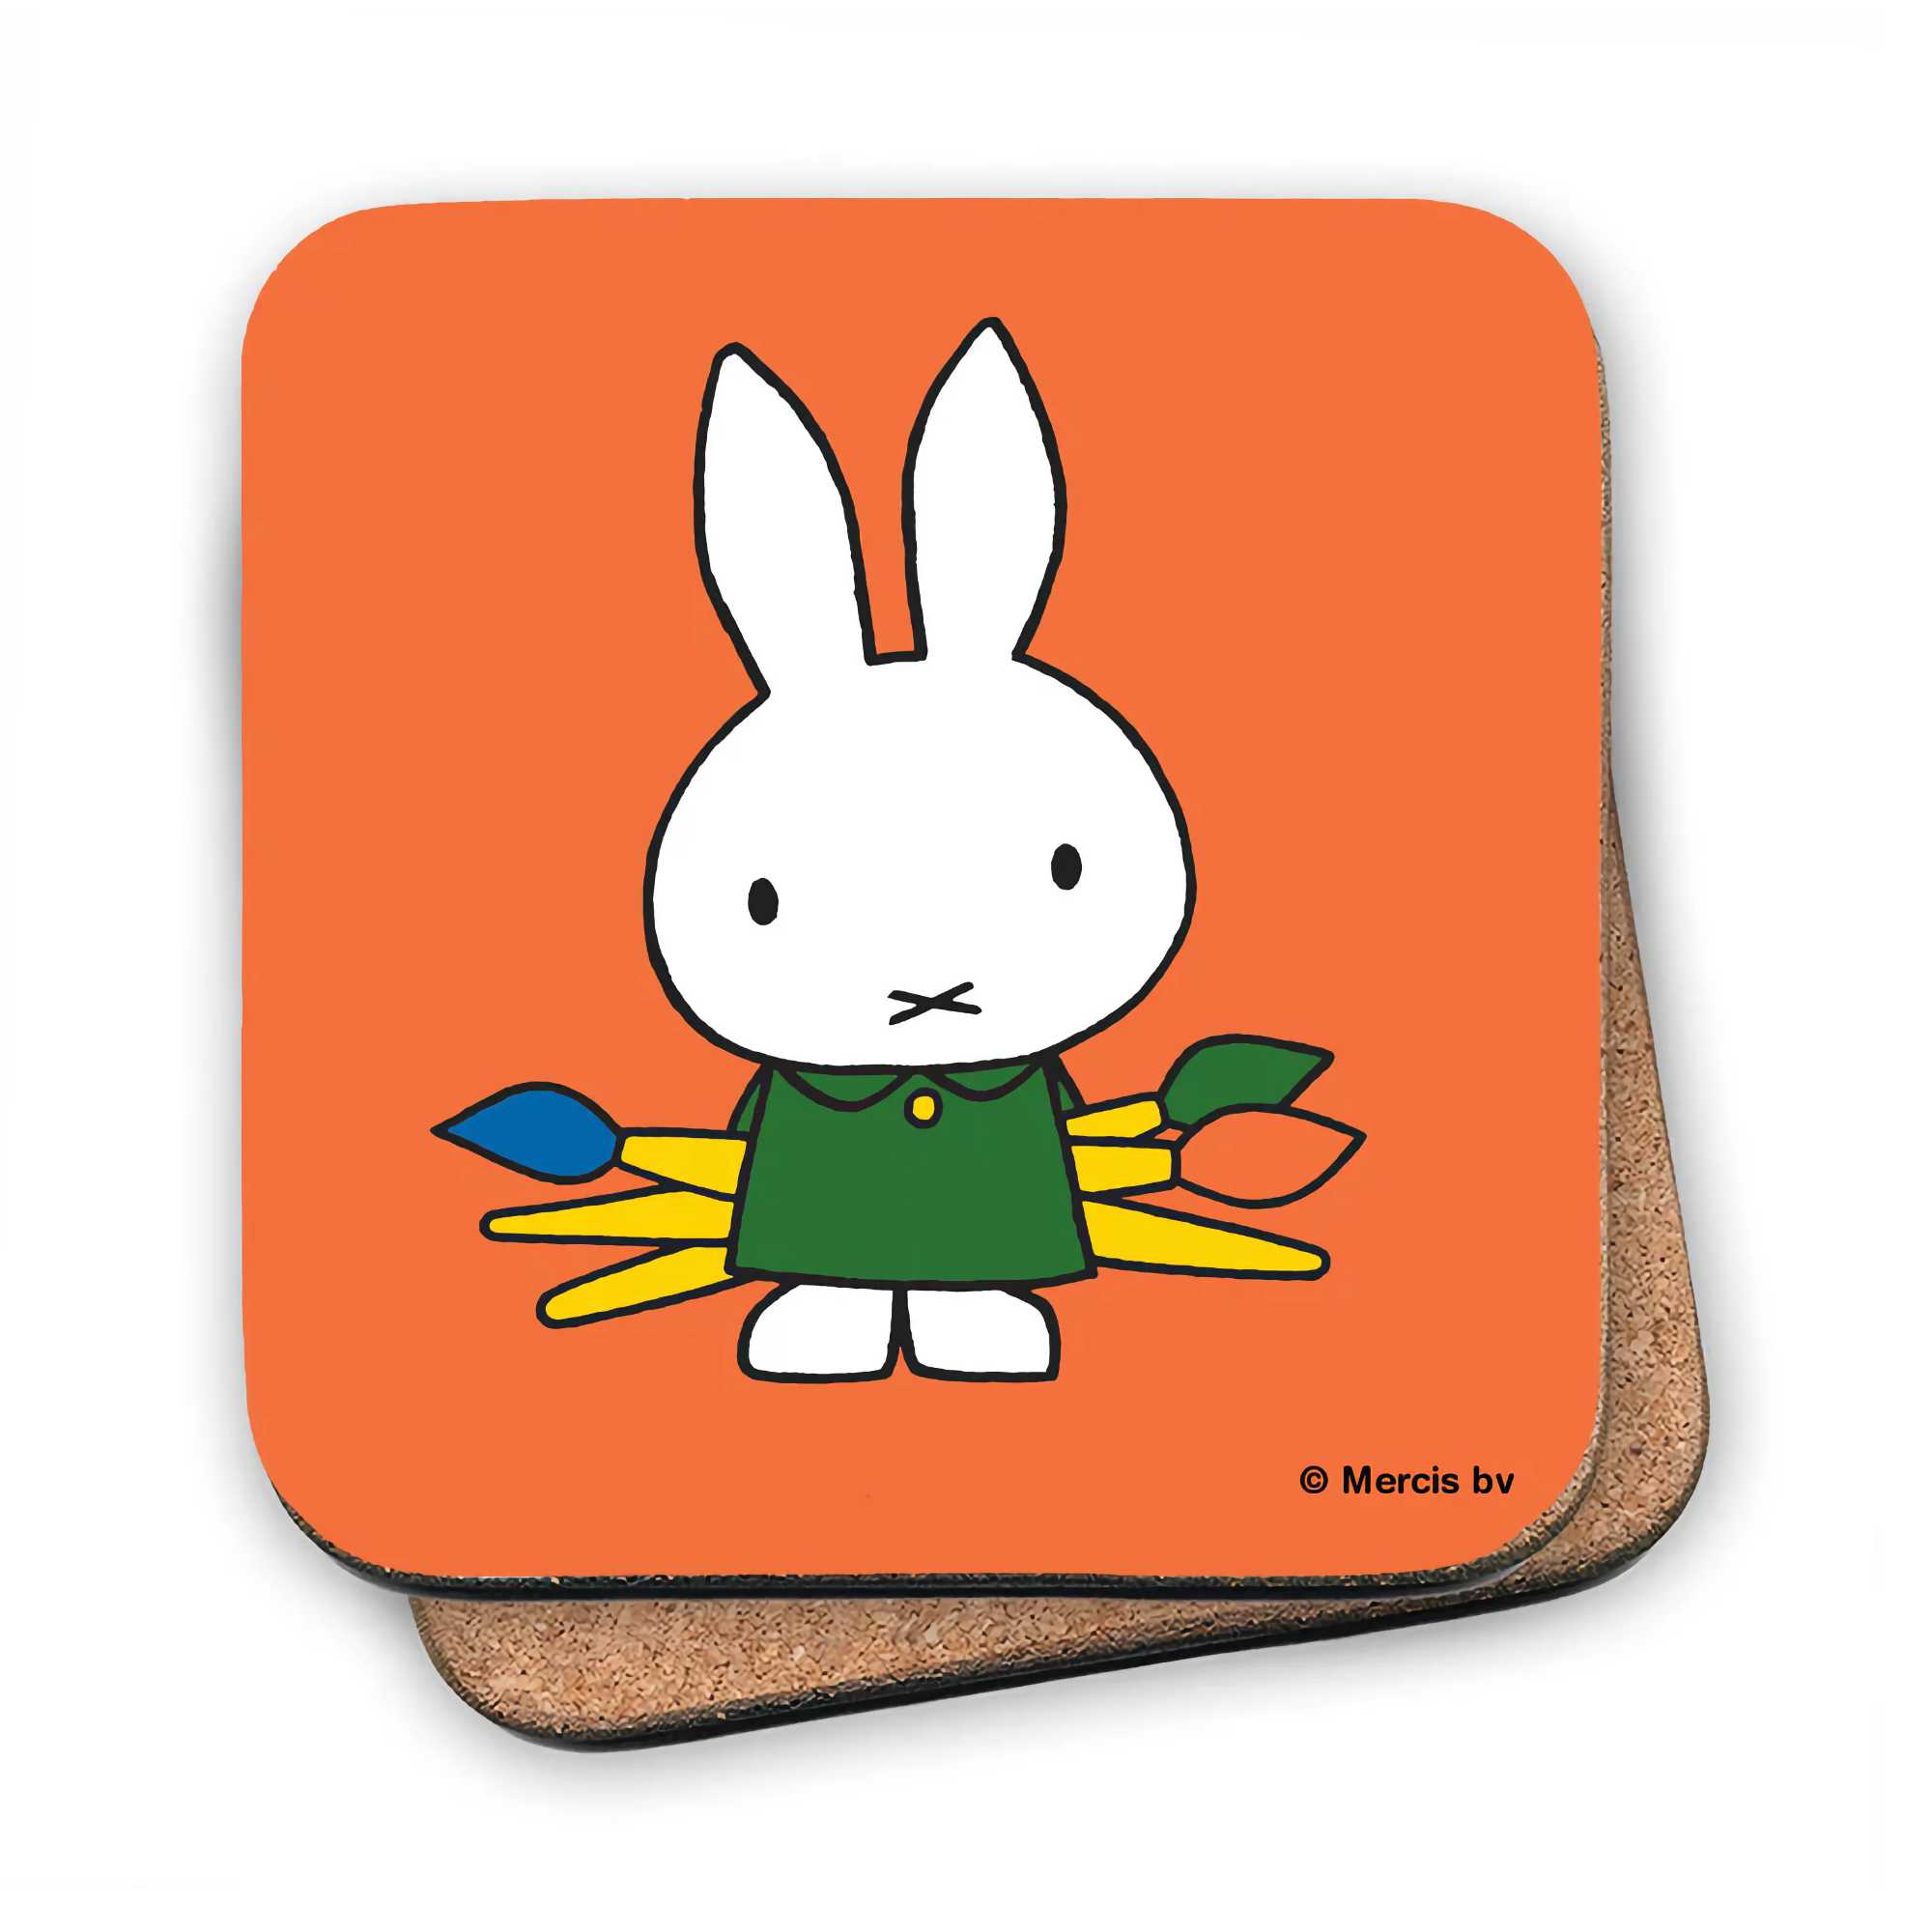 Star Editions Cork Coaster, Miffy Holding Paintbrushes